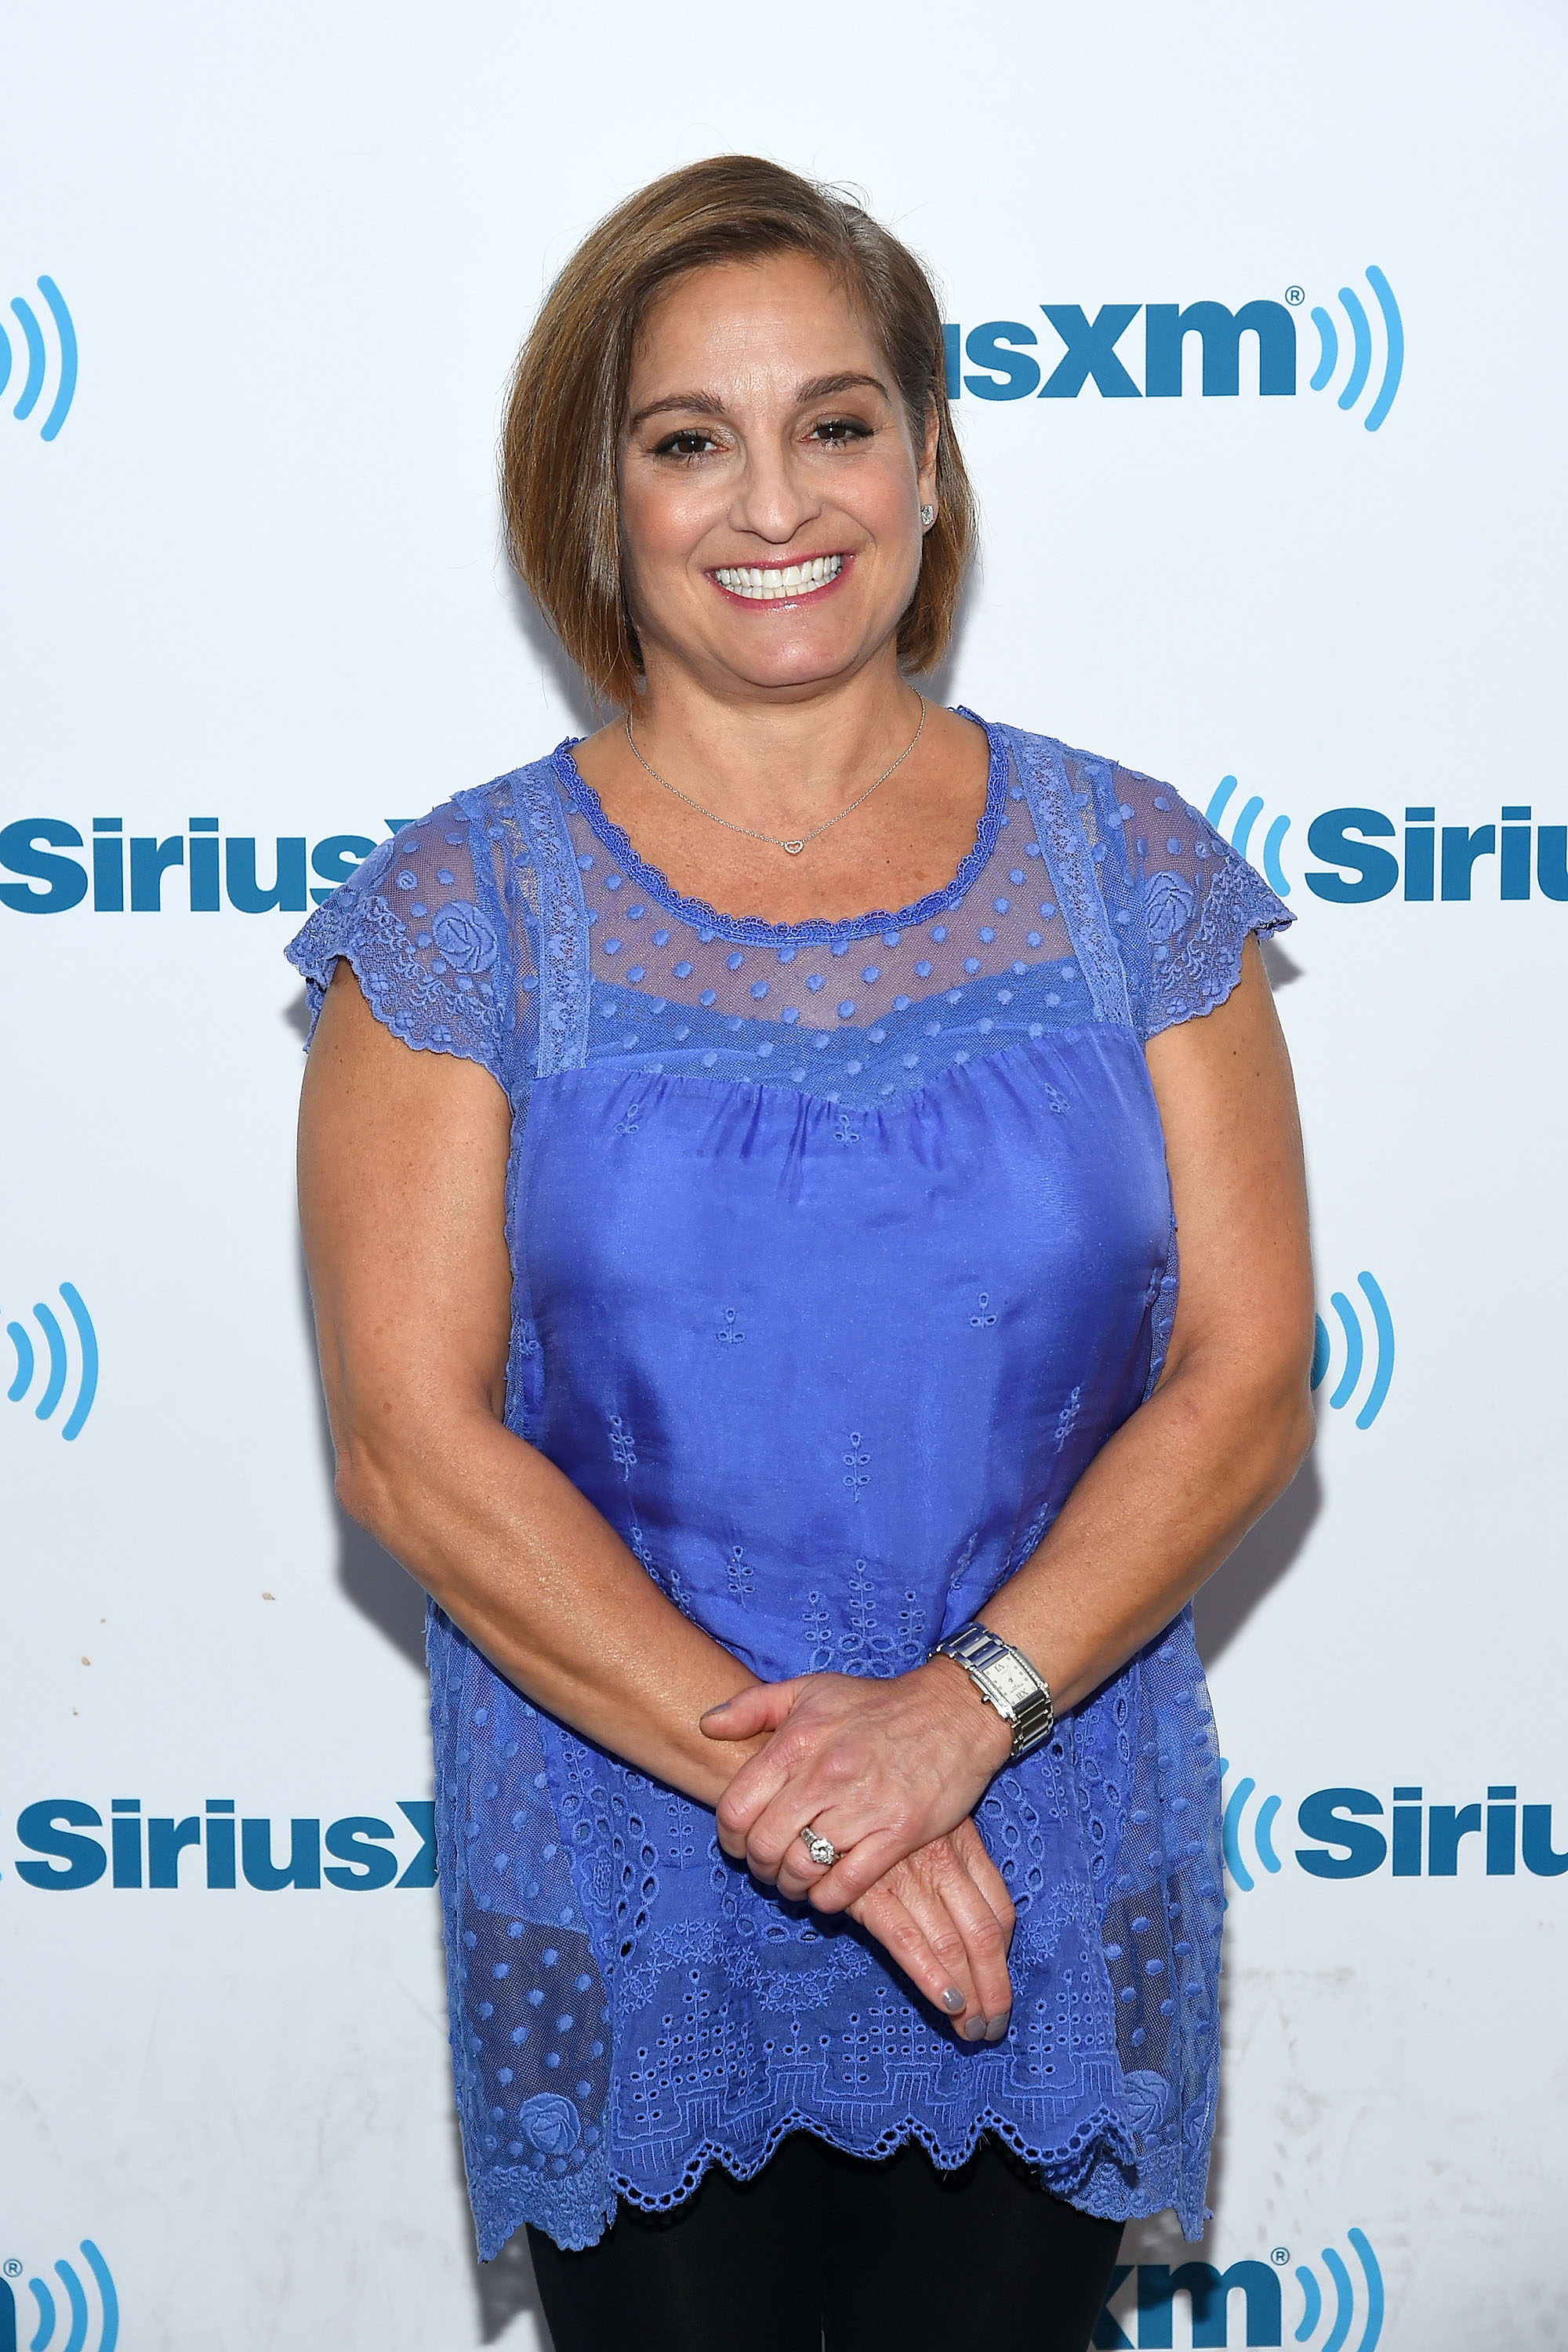 Mary Lou Retton at the SiriusXM Studio in New York City on August 9, 2016 | Source: Getty Images